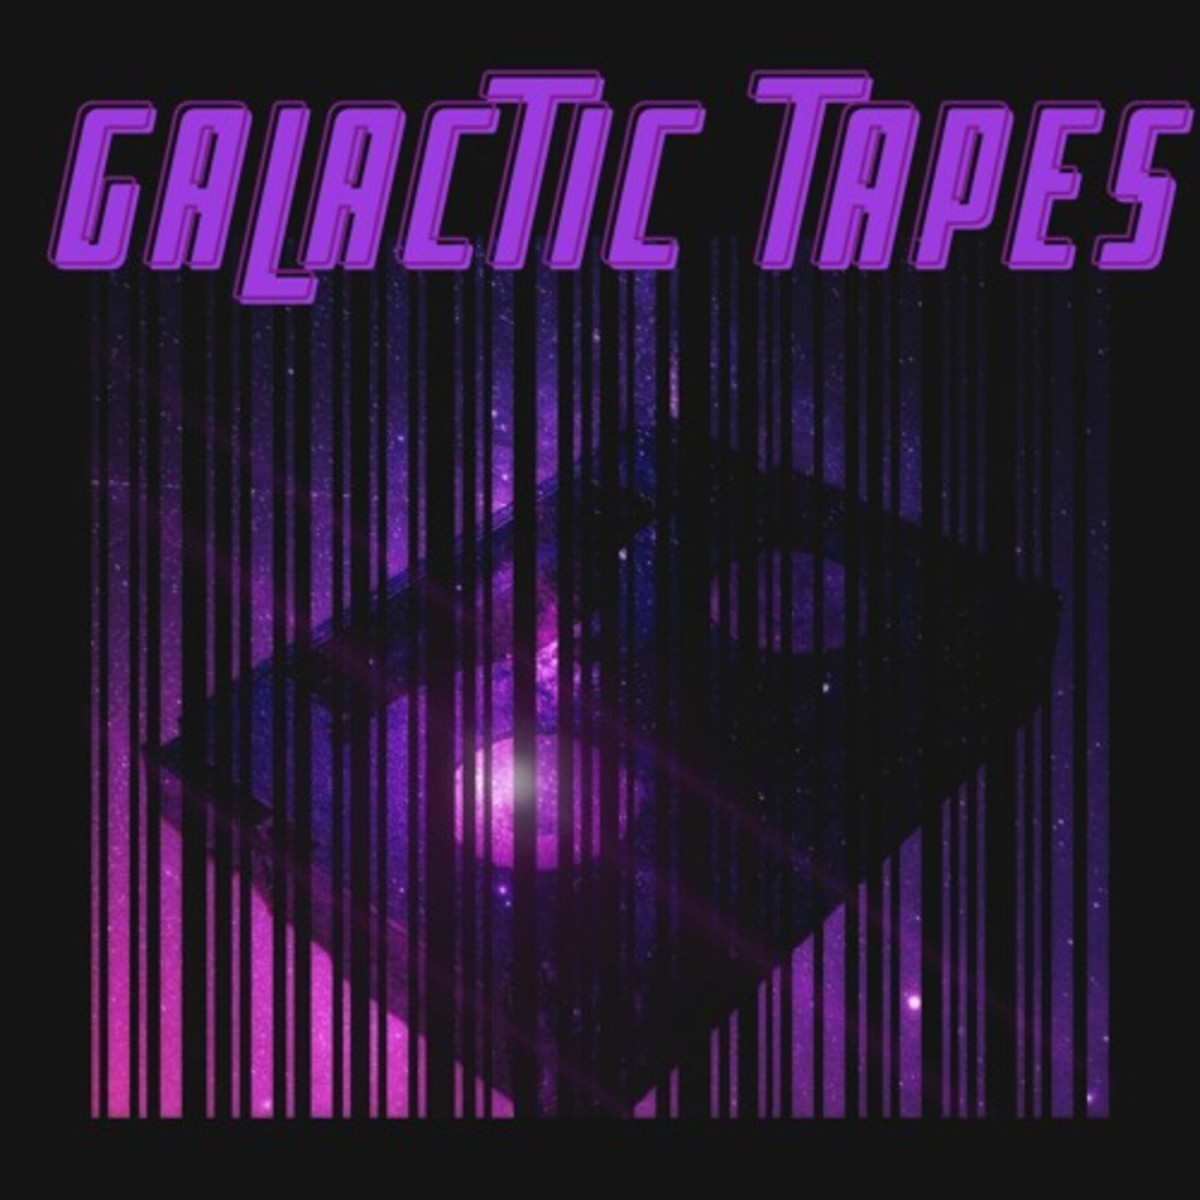 synth-single-review-in-waiting-by-galactic-tapes